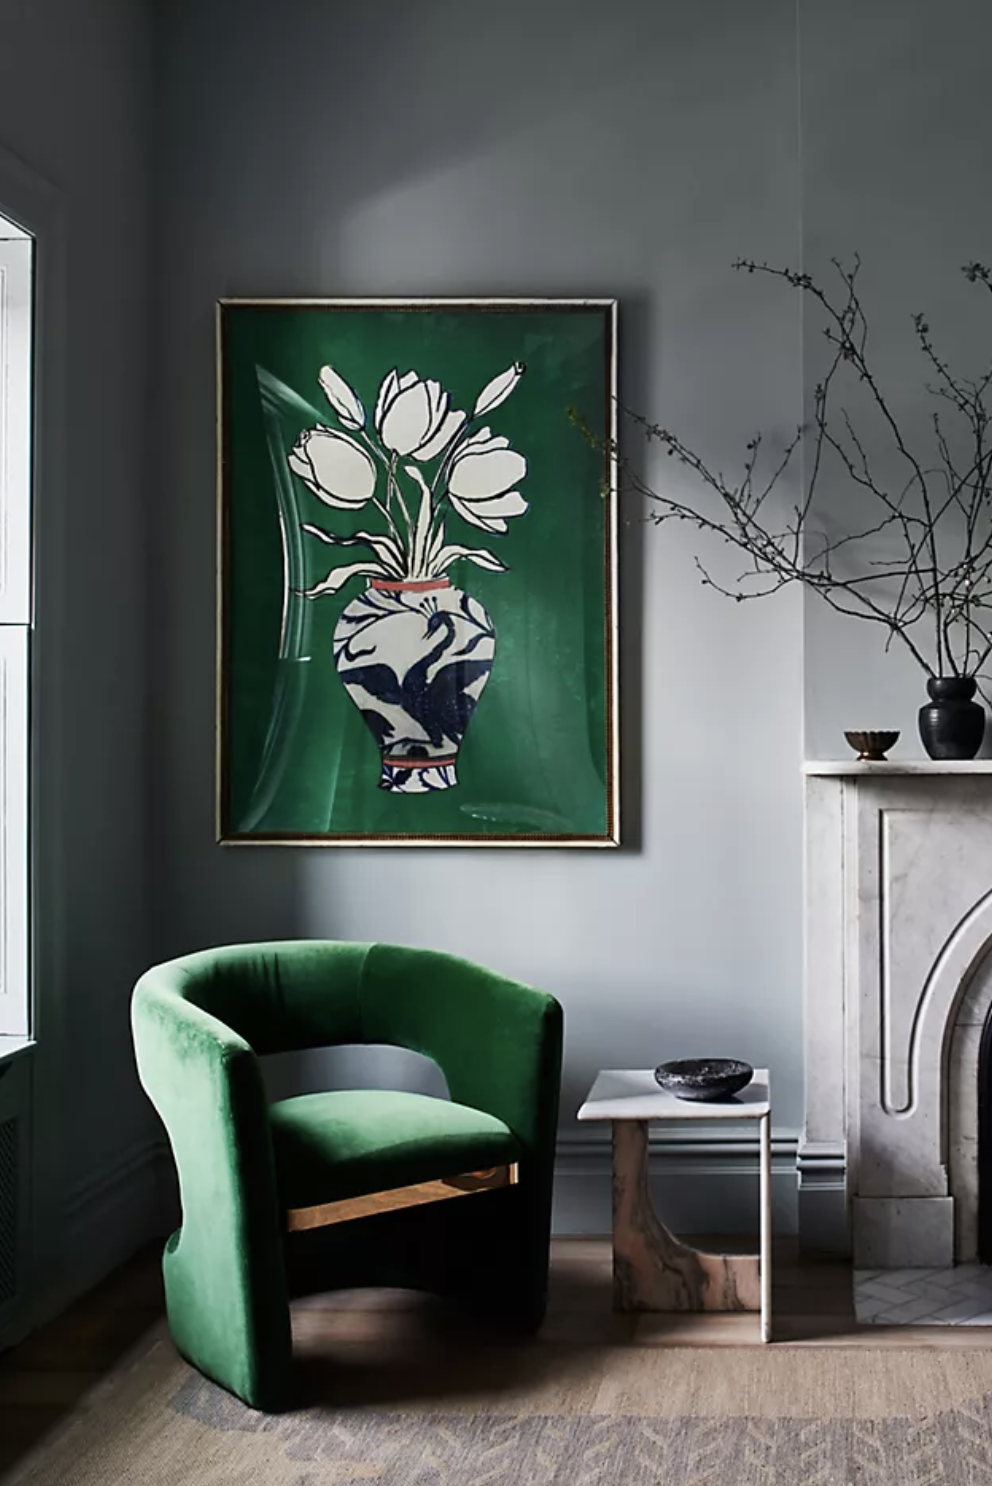 the green art piece with flowers in a vase hanging on a wall